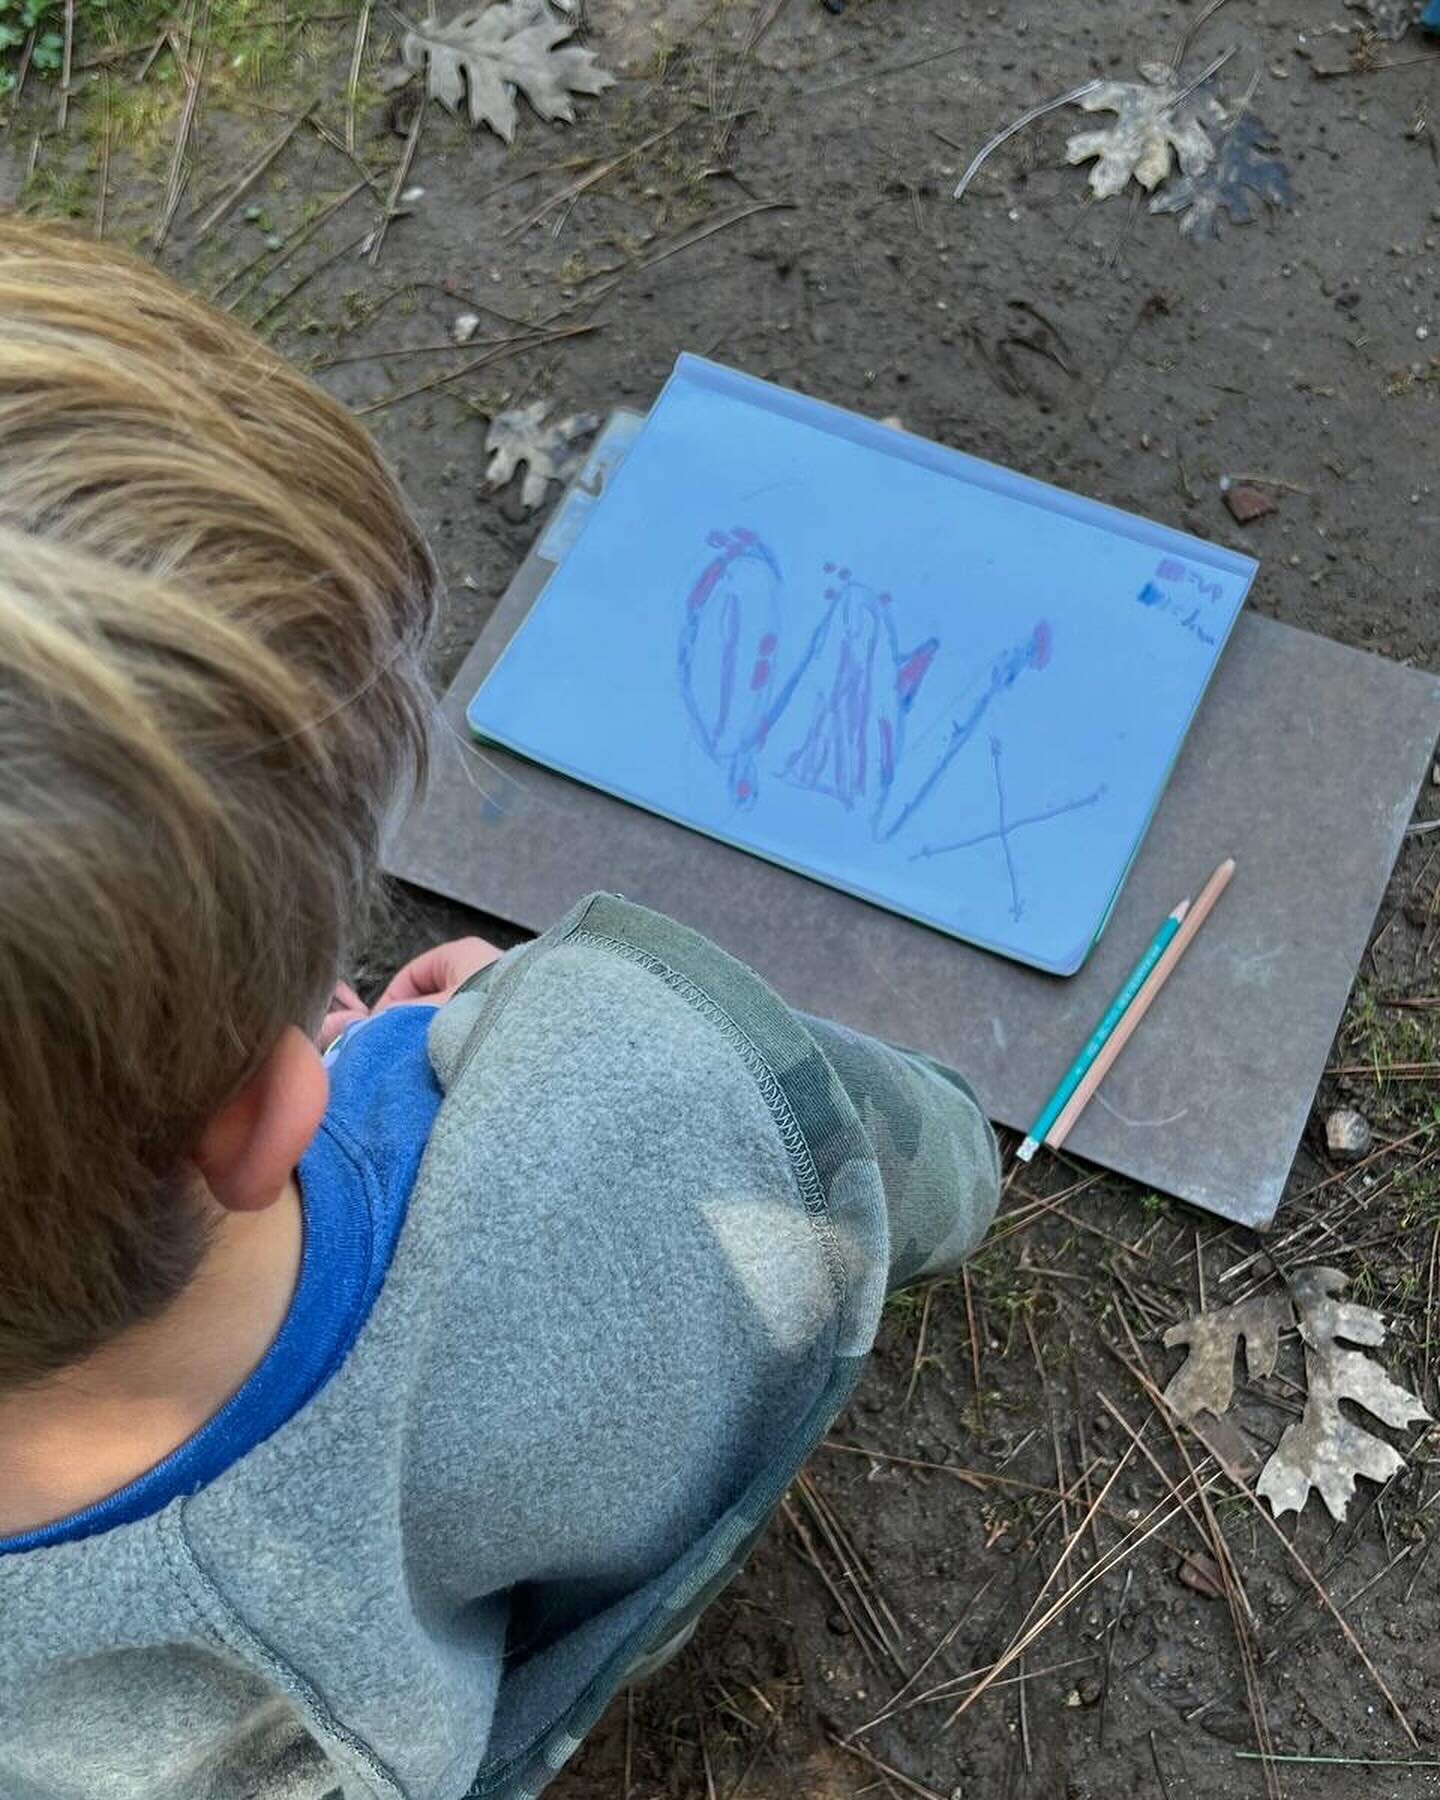 👣 Tracking and awareness go hand in hand. We mapped our thumb prints one day and deer tracks the next. Students were challenged to look as close as possible for smaller and smaller detail and map the track&rsquo;s topographically, with &ldquo;geogra